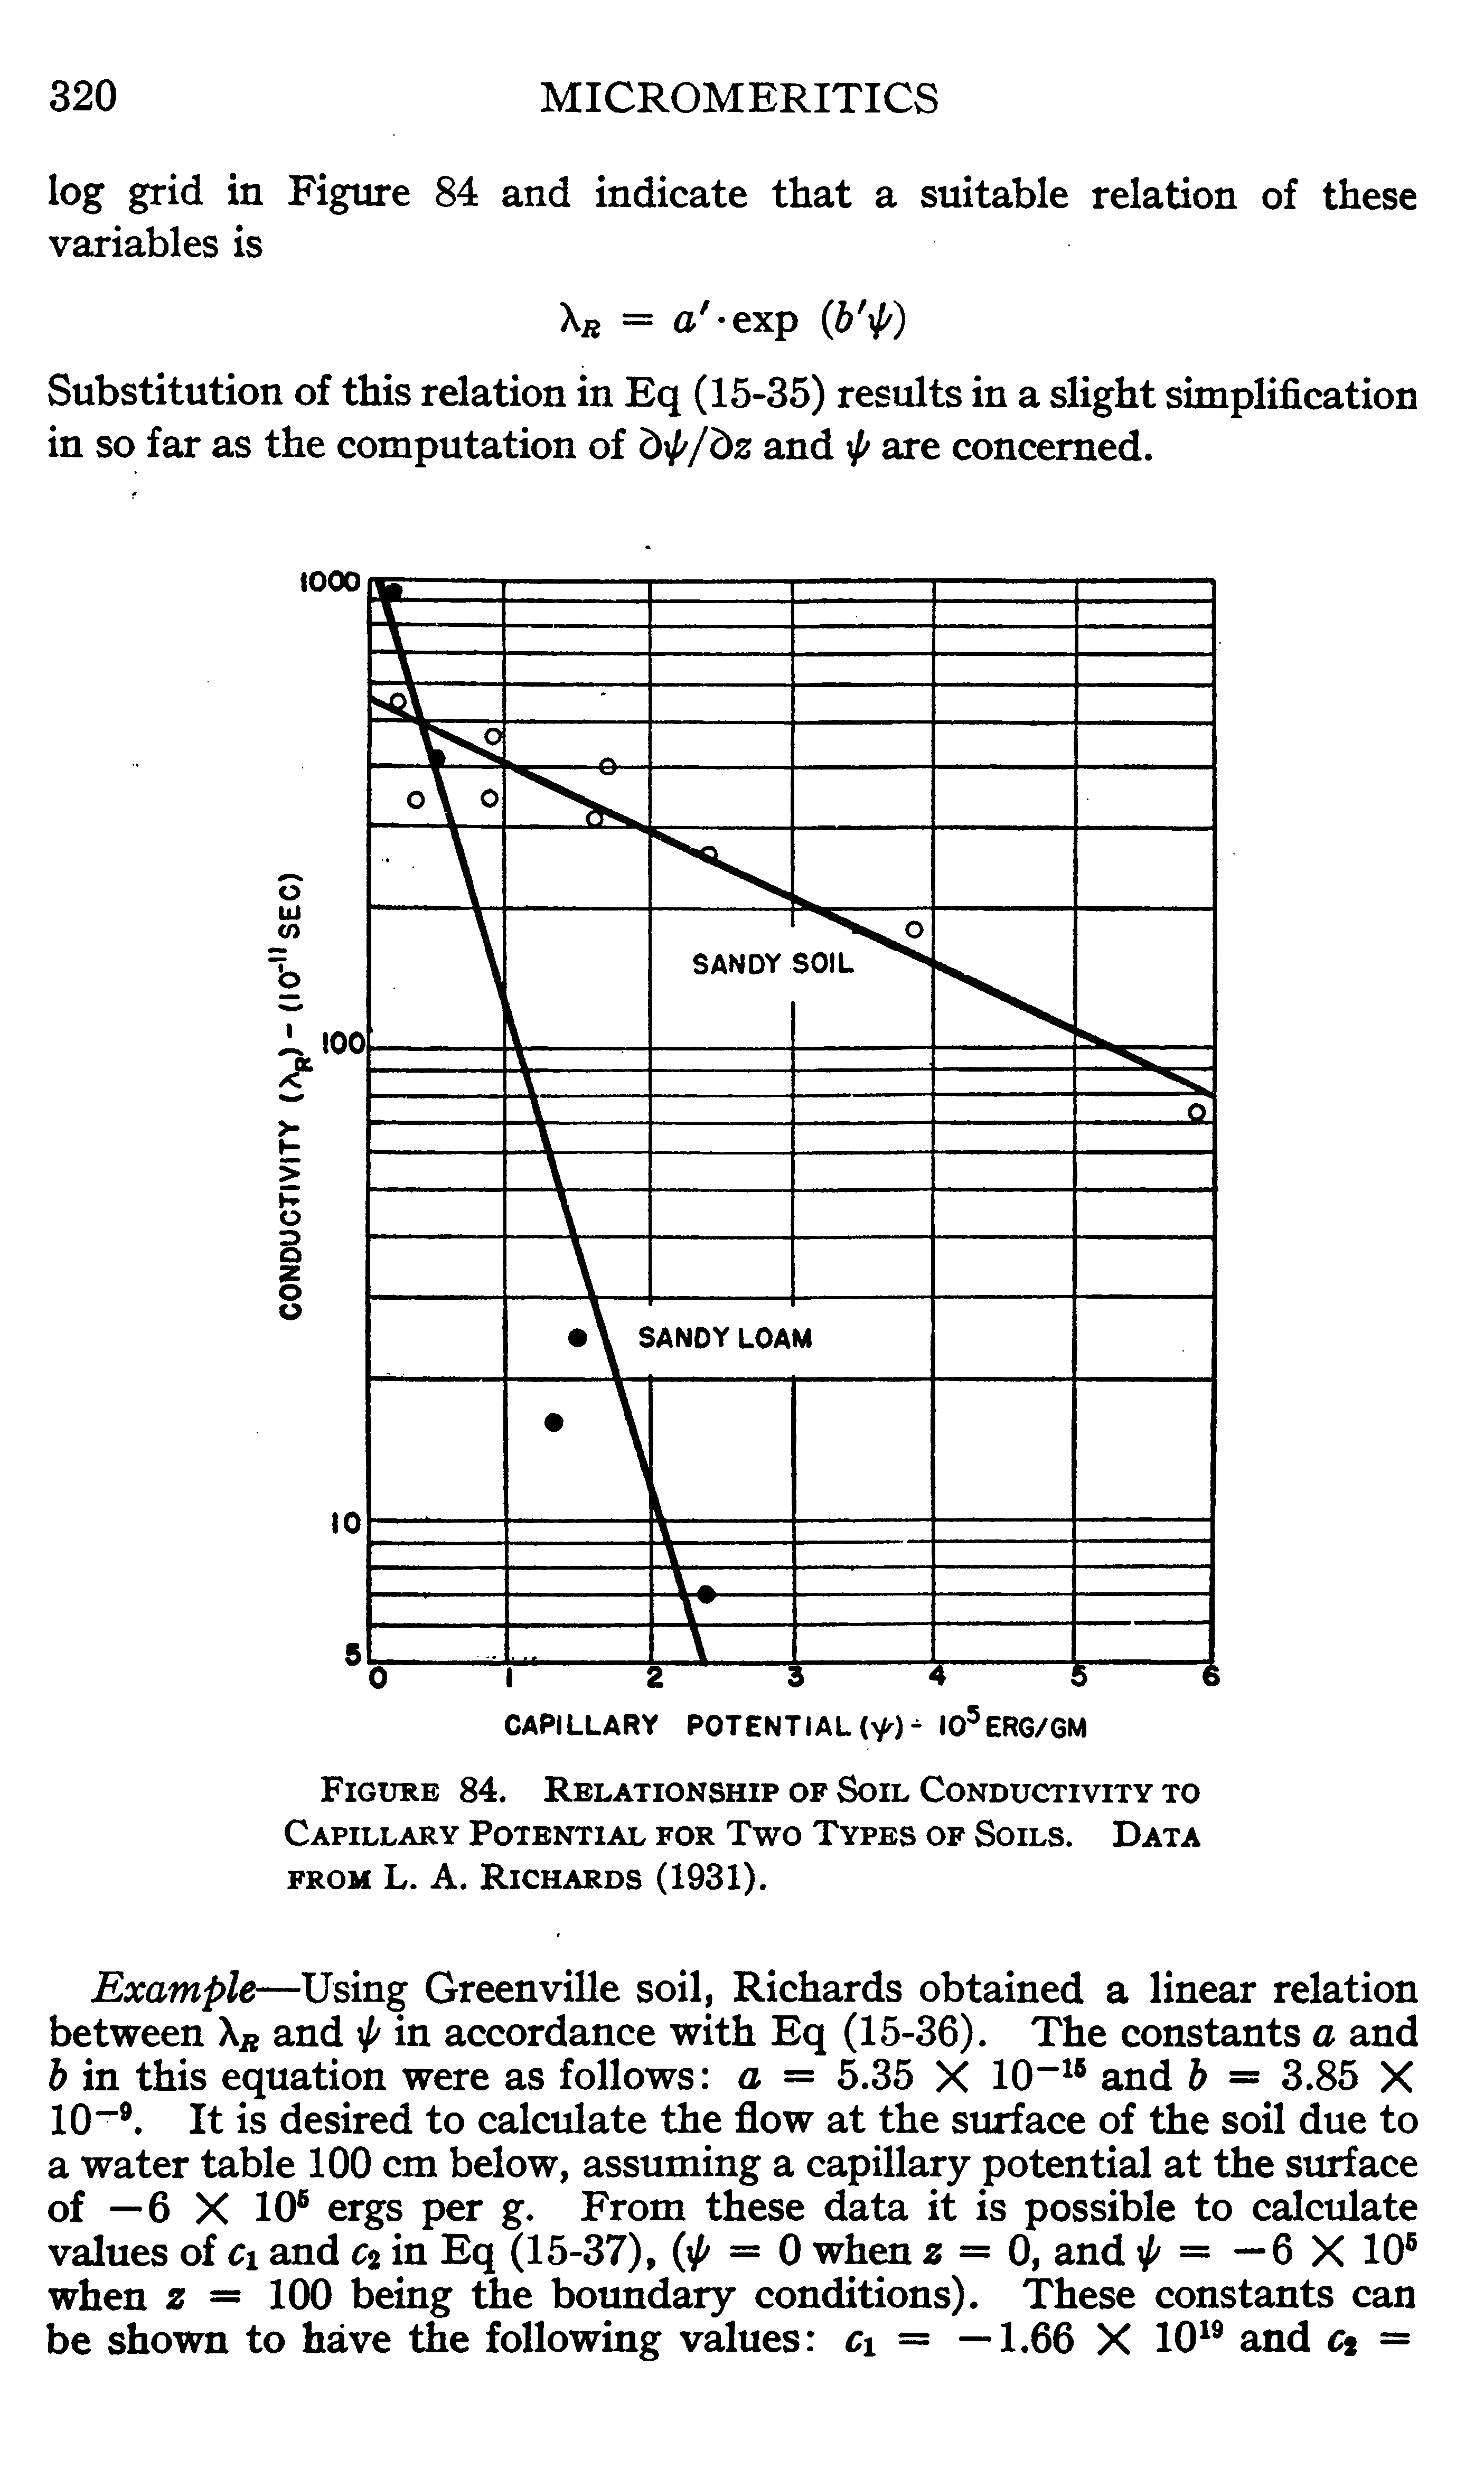 Figure 84. Relationship of Soil Conductivity to Capillary Potential for Two Types of Soils. Data from L. A. Richards (1931).